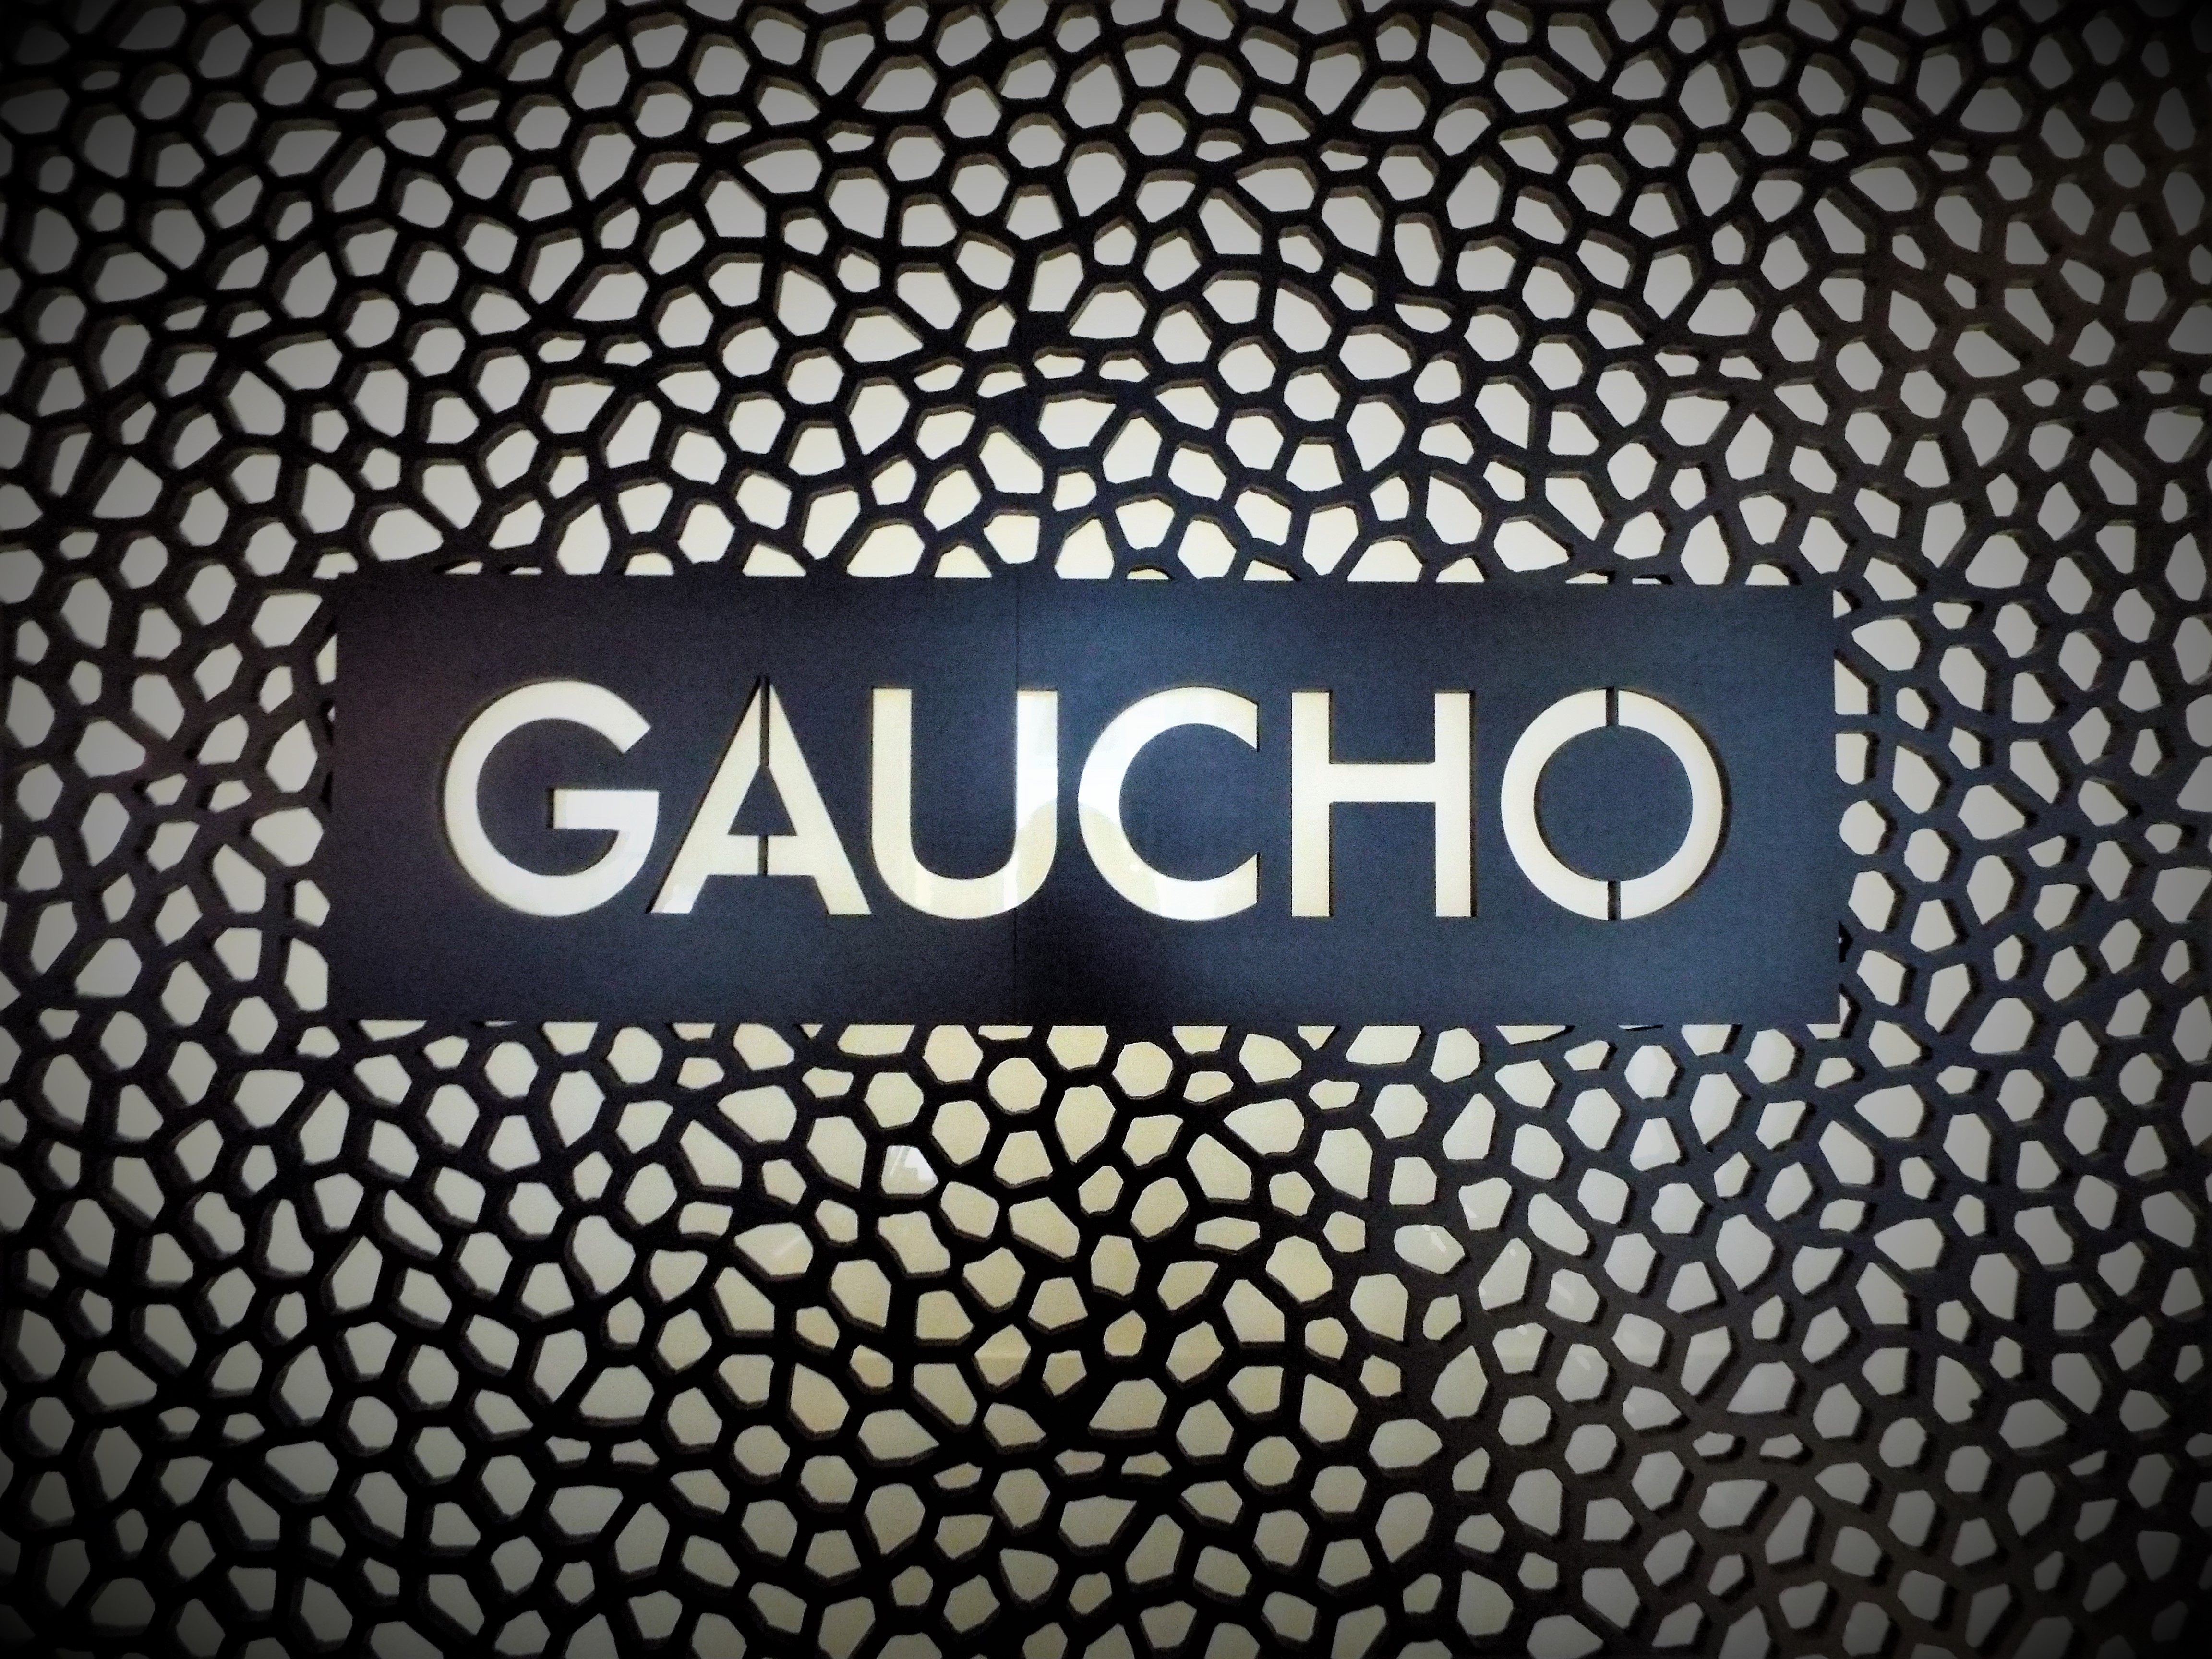 Beef, Wine and all things fine at Gaucho Birmingham